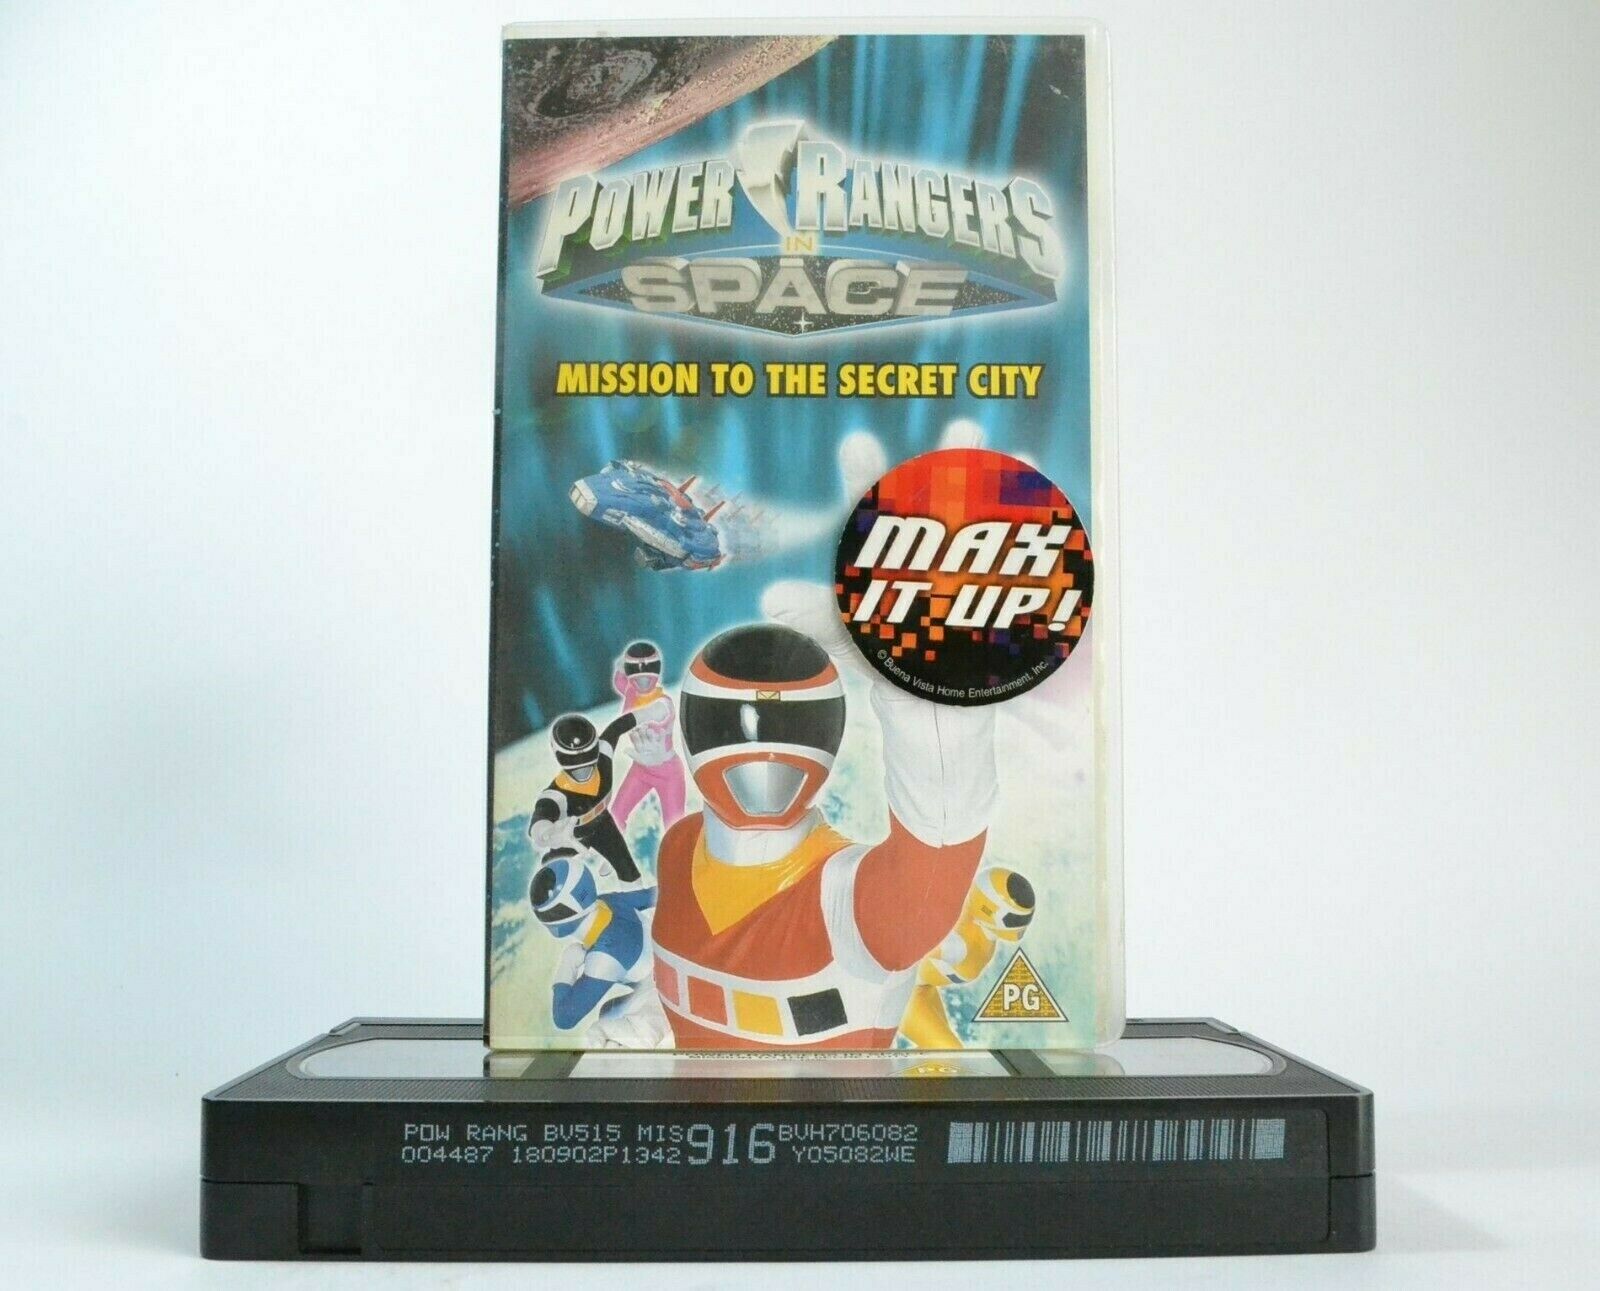 Power Rangers In Space: 'Mission To The Secret City' - Children's Series - VHS-